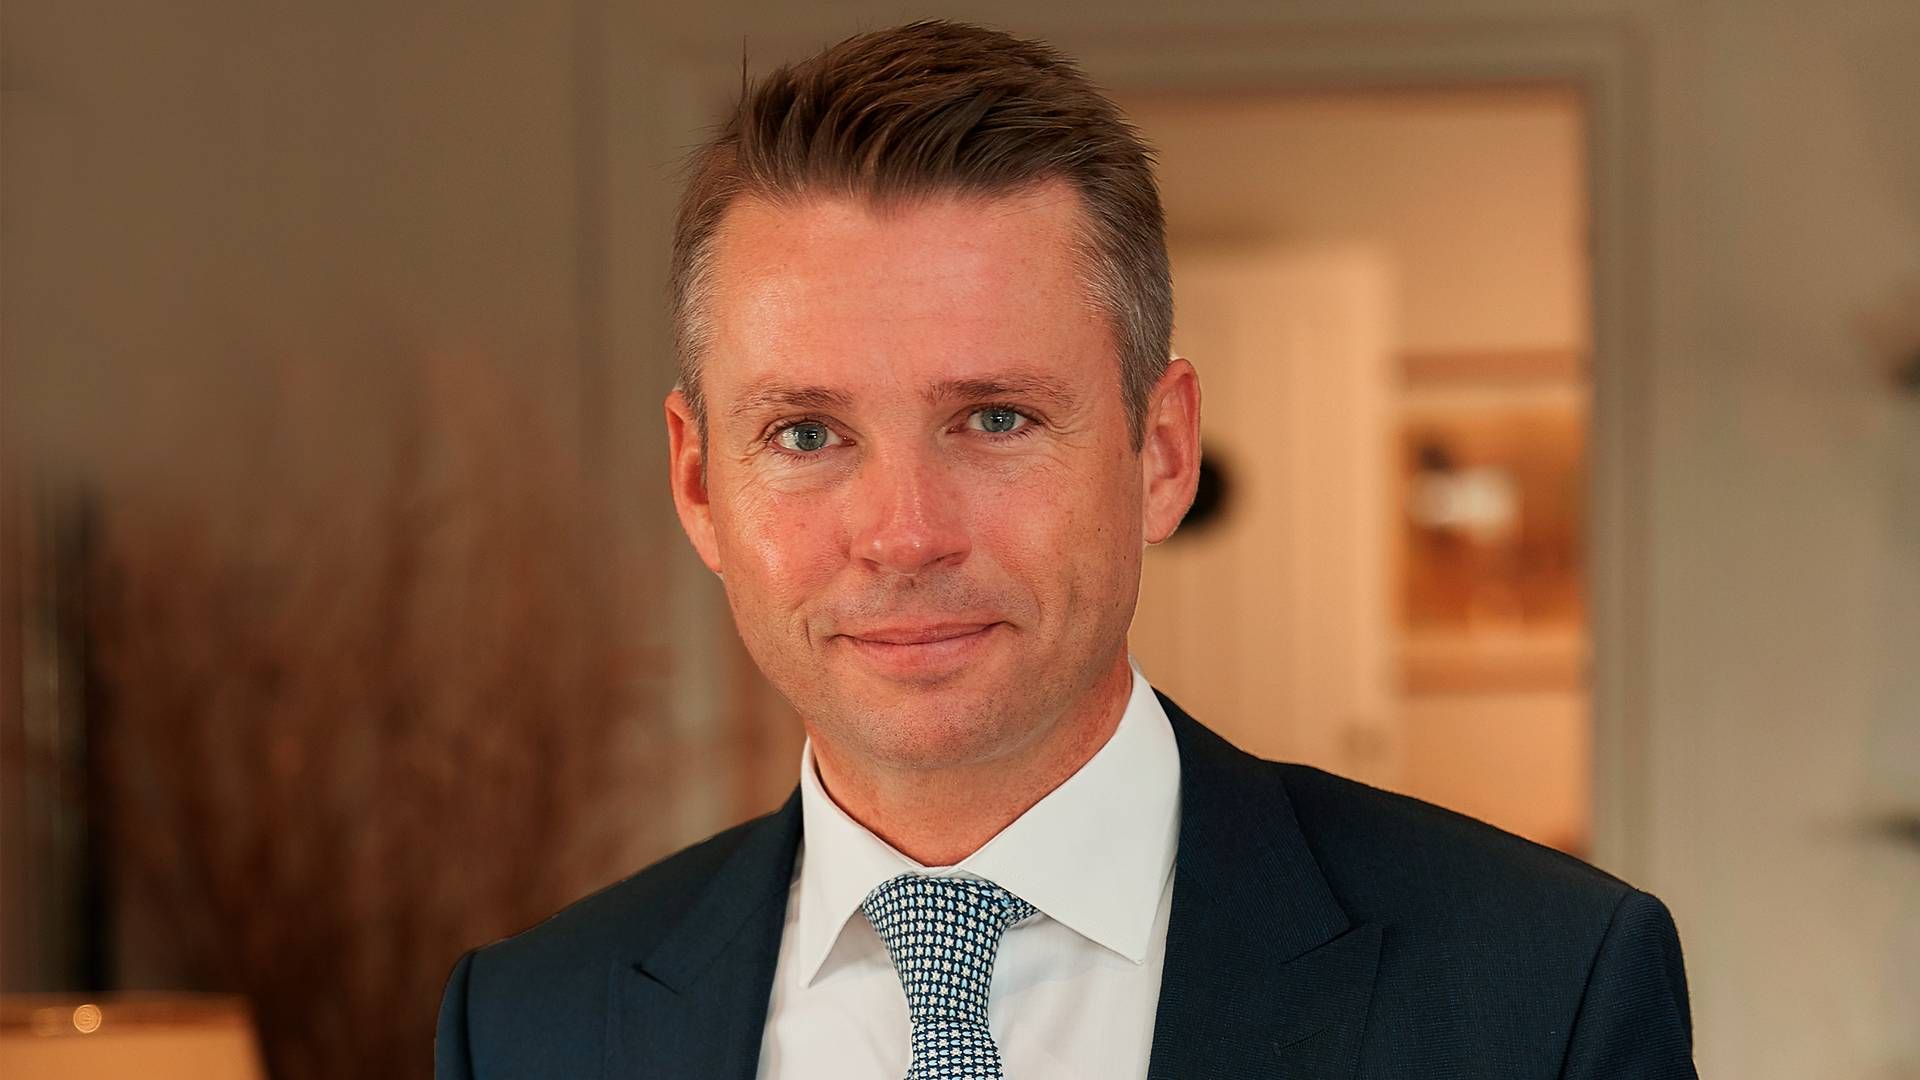 Anders Østergaard is CEO of oil supplier Monjasa, which he also owns. The Danish national lives in Dubai. | Photo: Monjasa